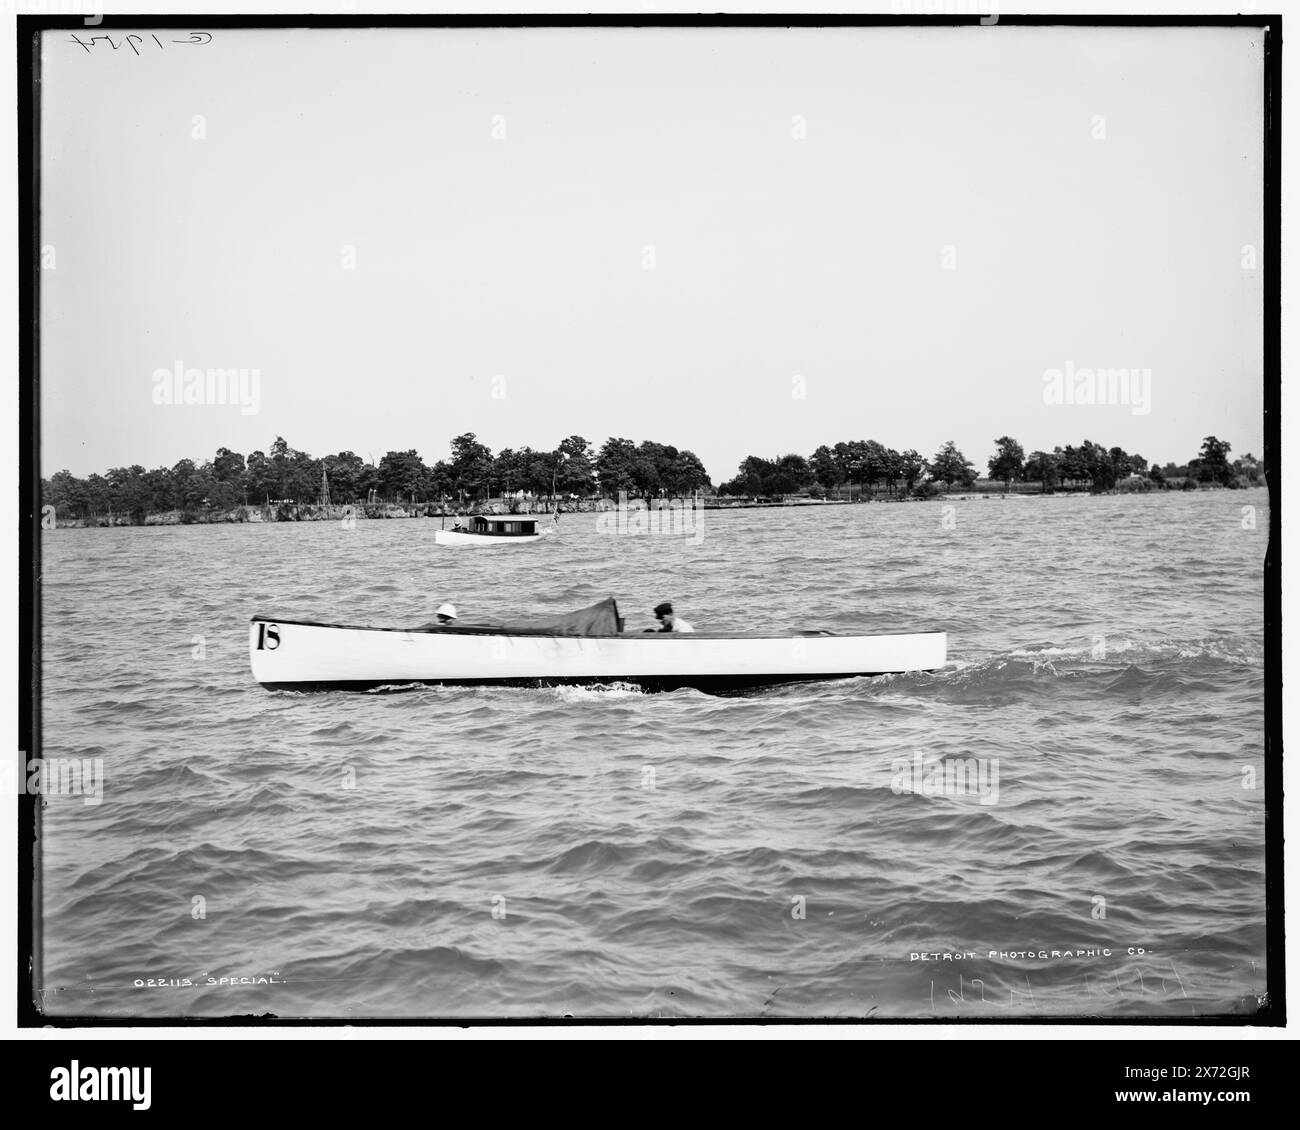 Special, 'G 1954' auf negativ, Detroit Publishing Co.-Nr. 022113., Geschenk; State Historical Society of Colorado; 1949, Special (Motorboot), Motorboote. Stockfoto